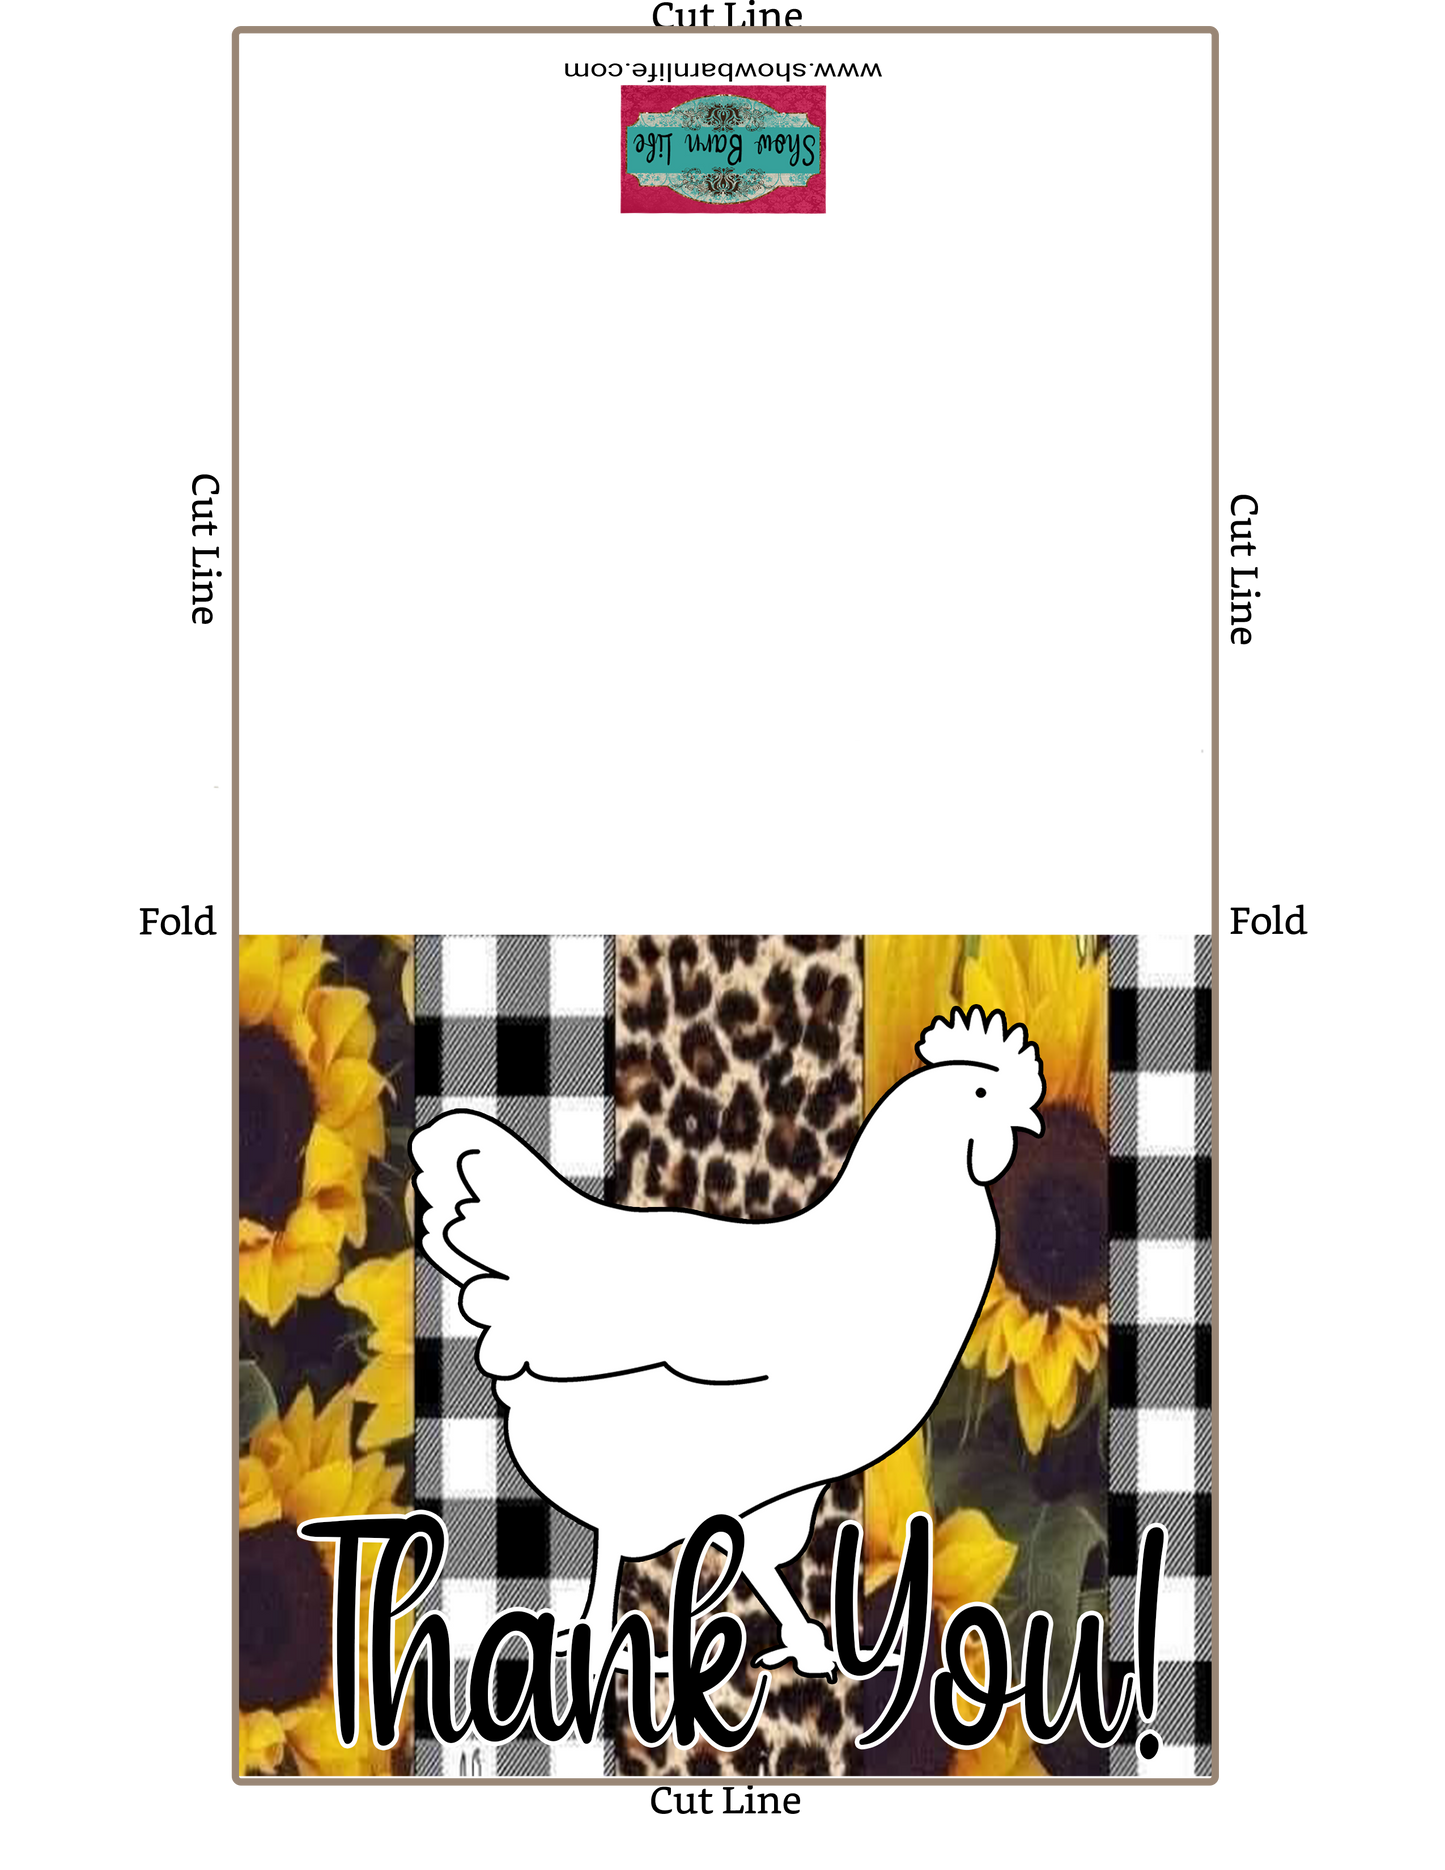 Livestock Show Poultry Thank You Card - Stock Show Chicken -  Sunflowers Cheetah - Poultry Digital Cards